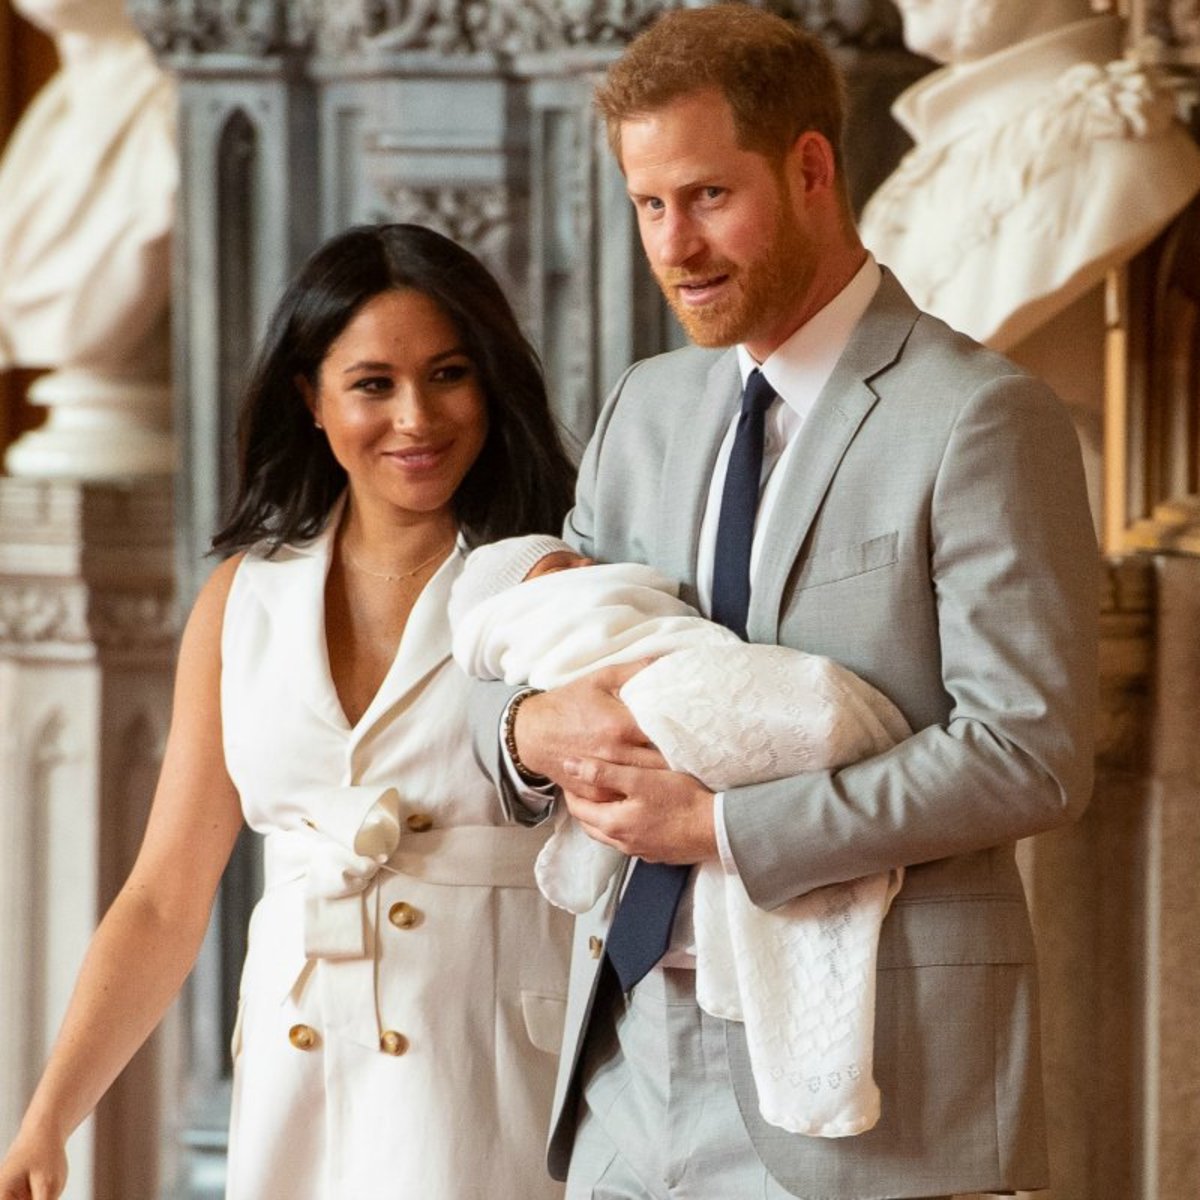 Meghan Markle pays subtle tribute to Kate Middleton at Archie's christening  - Heart